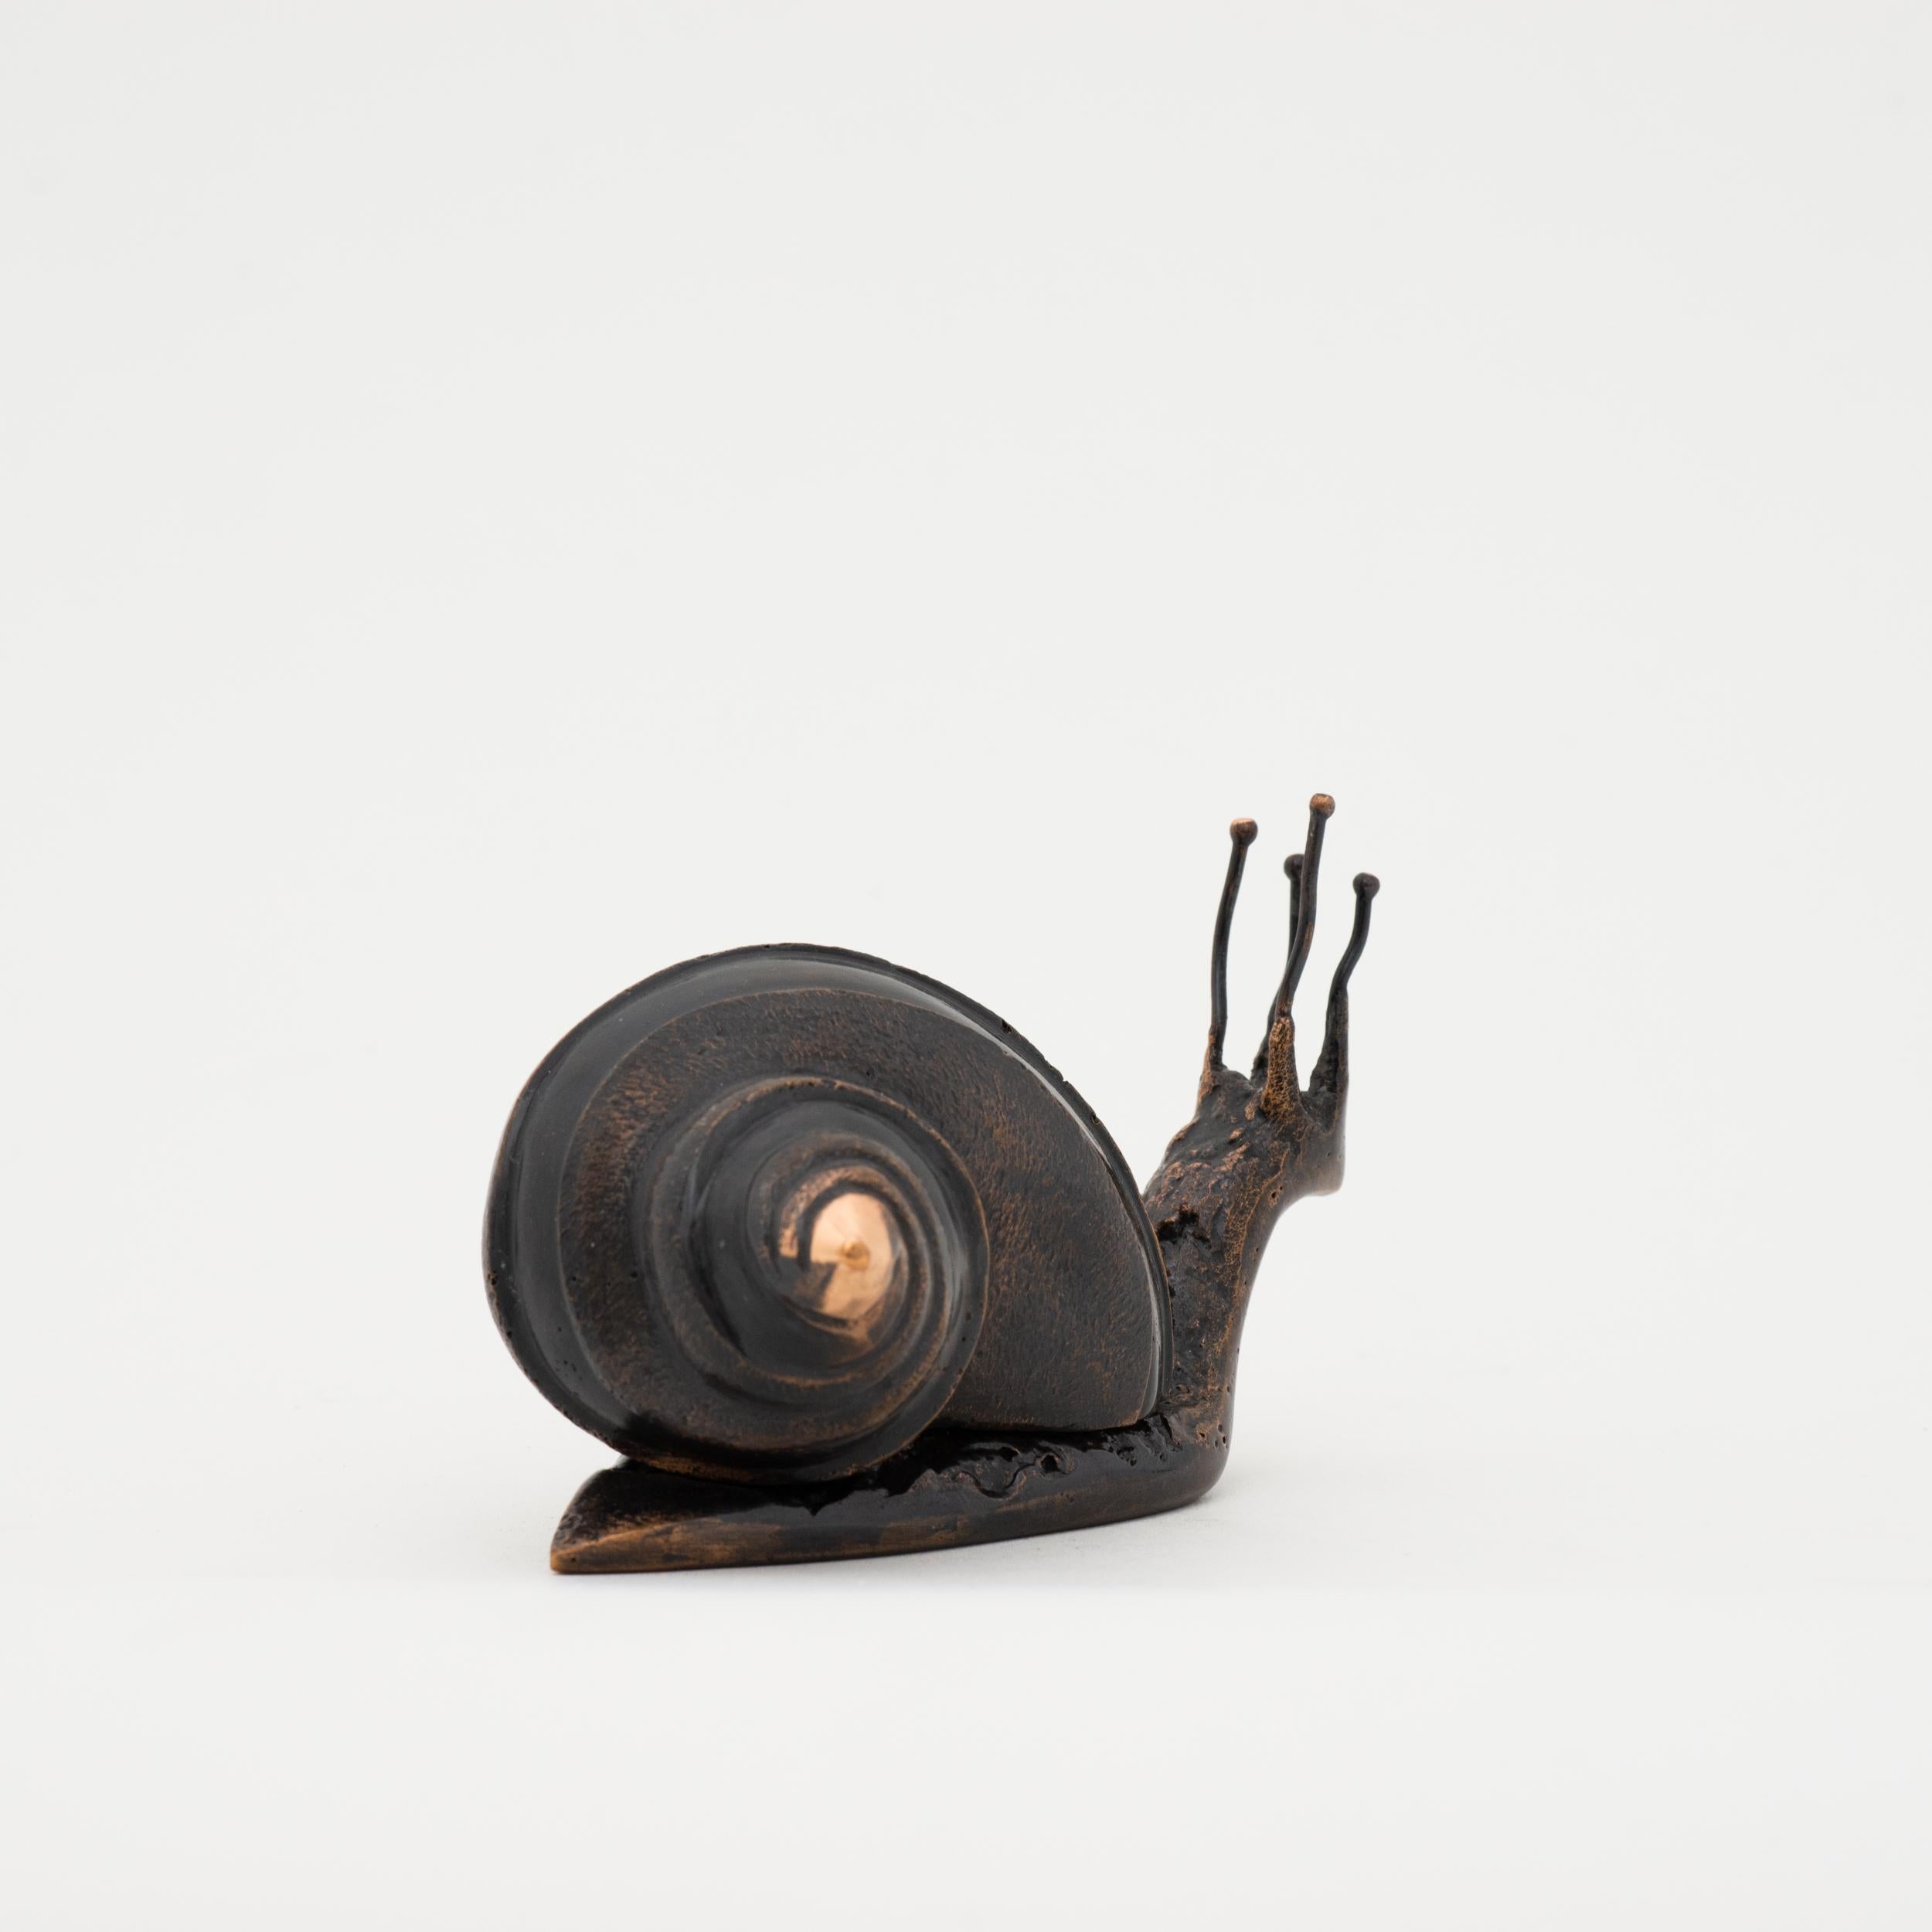 Each of these exquisite solid bronze snails is handmade individually with incredible detail. Cast using very traditional techniques, the noble material is aged unveiling a beautiful patina and finished with highlights.

Slight variations in the